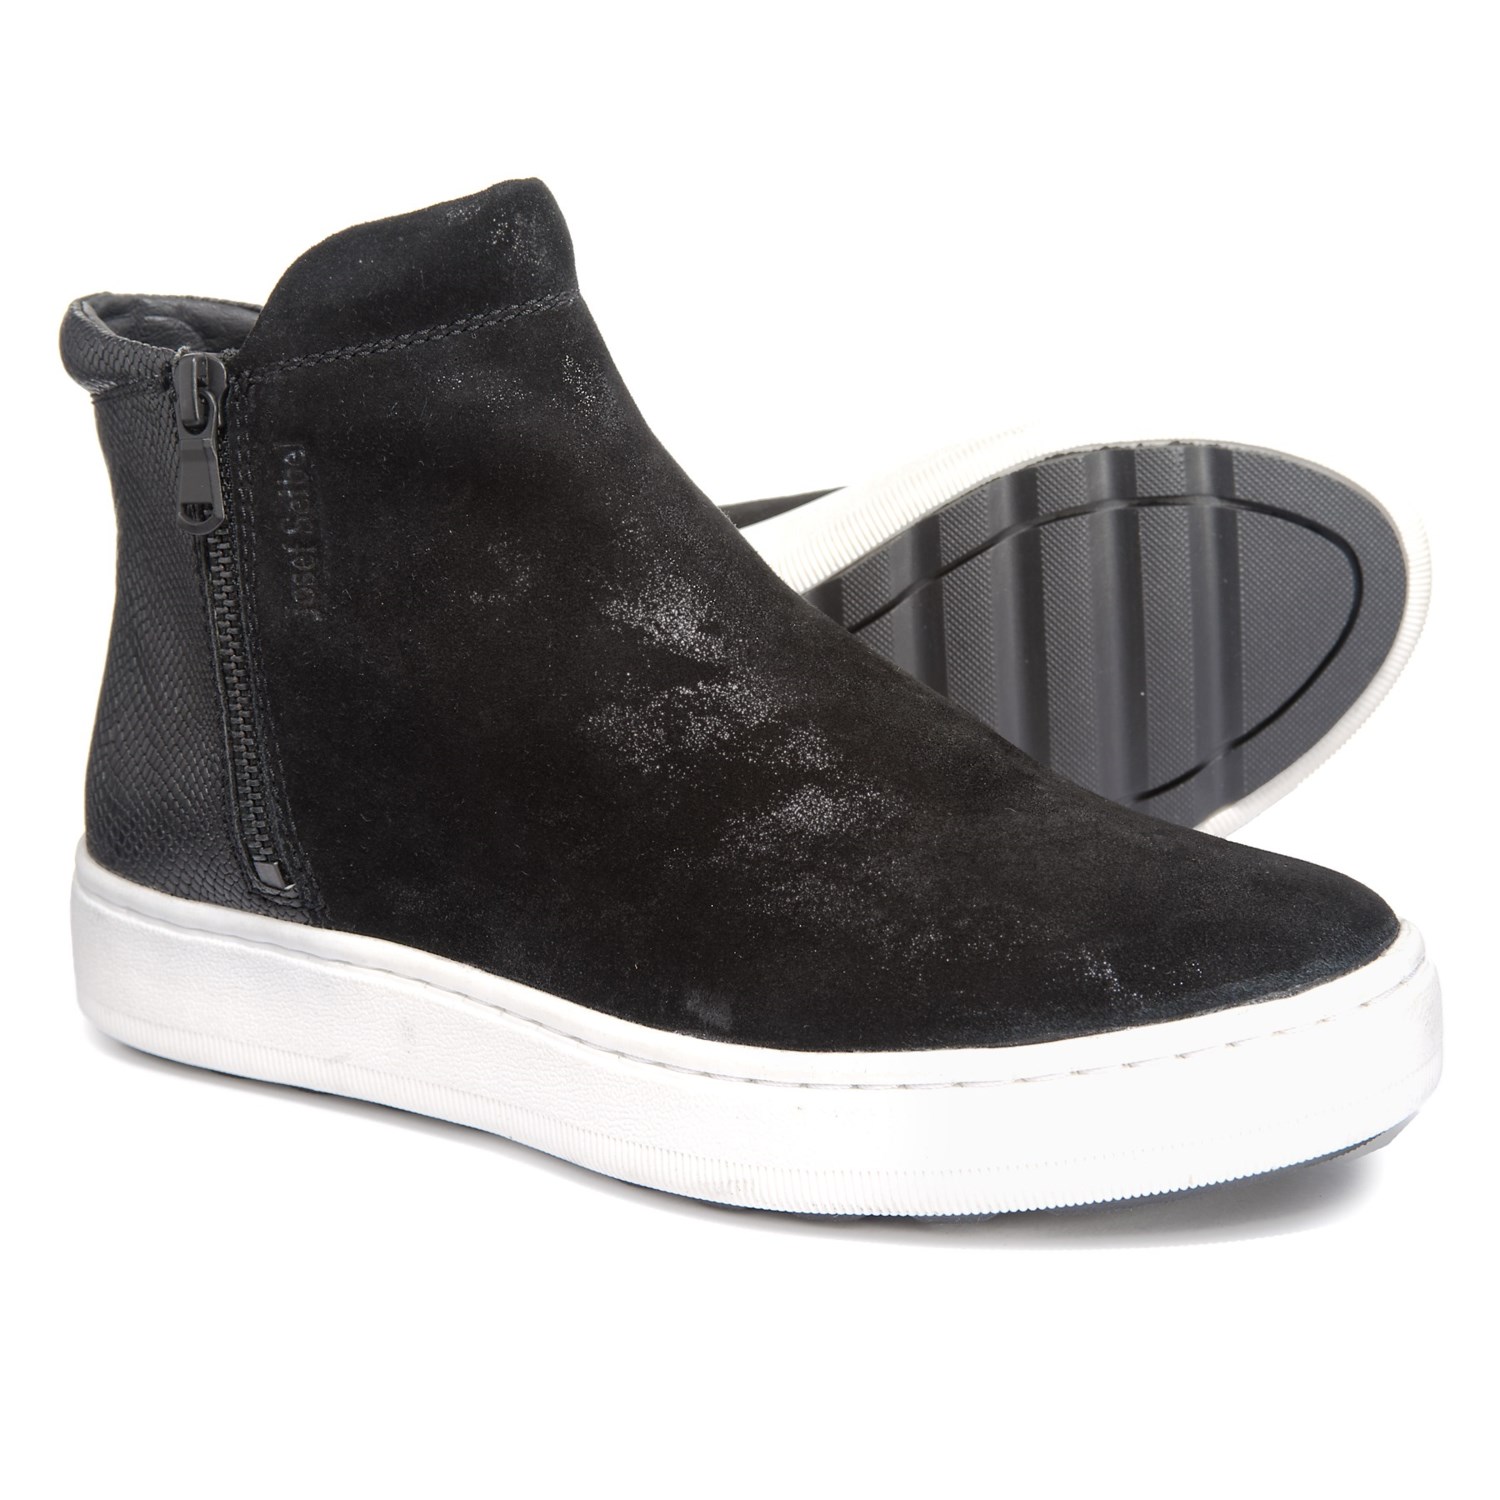 leather sneaker boots womens